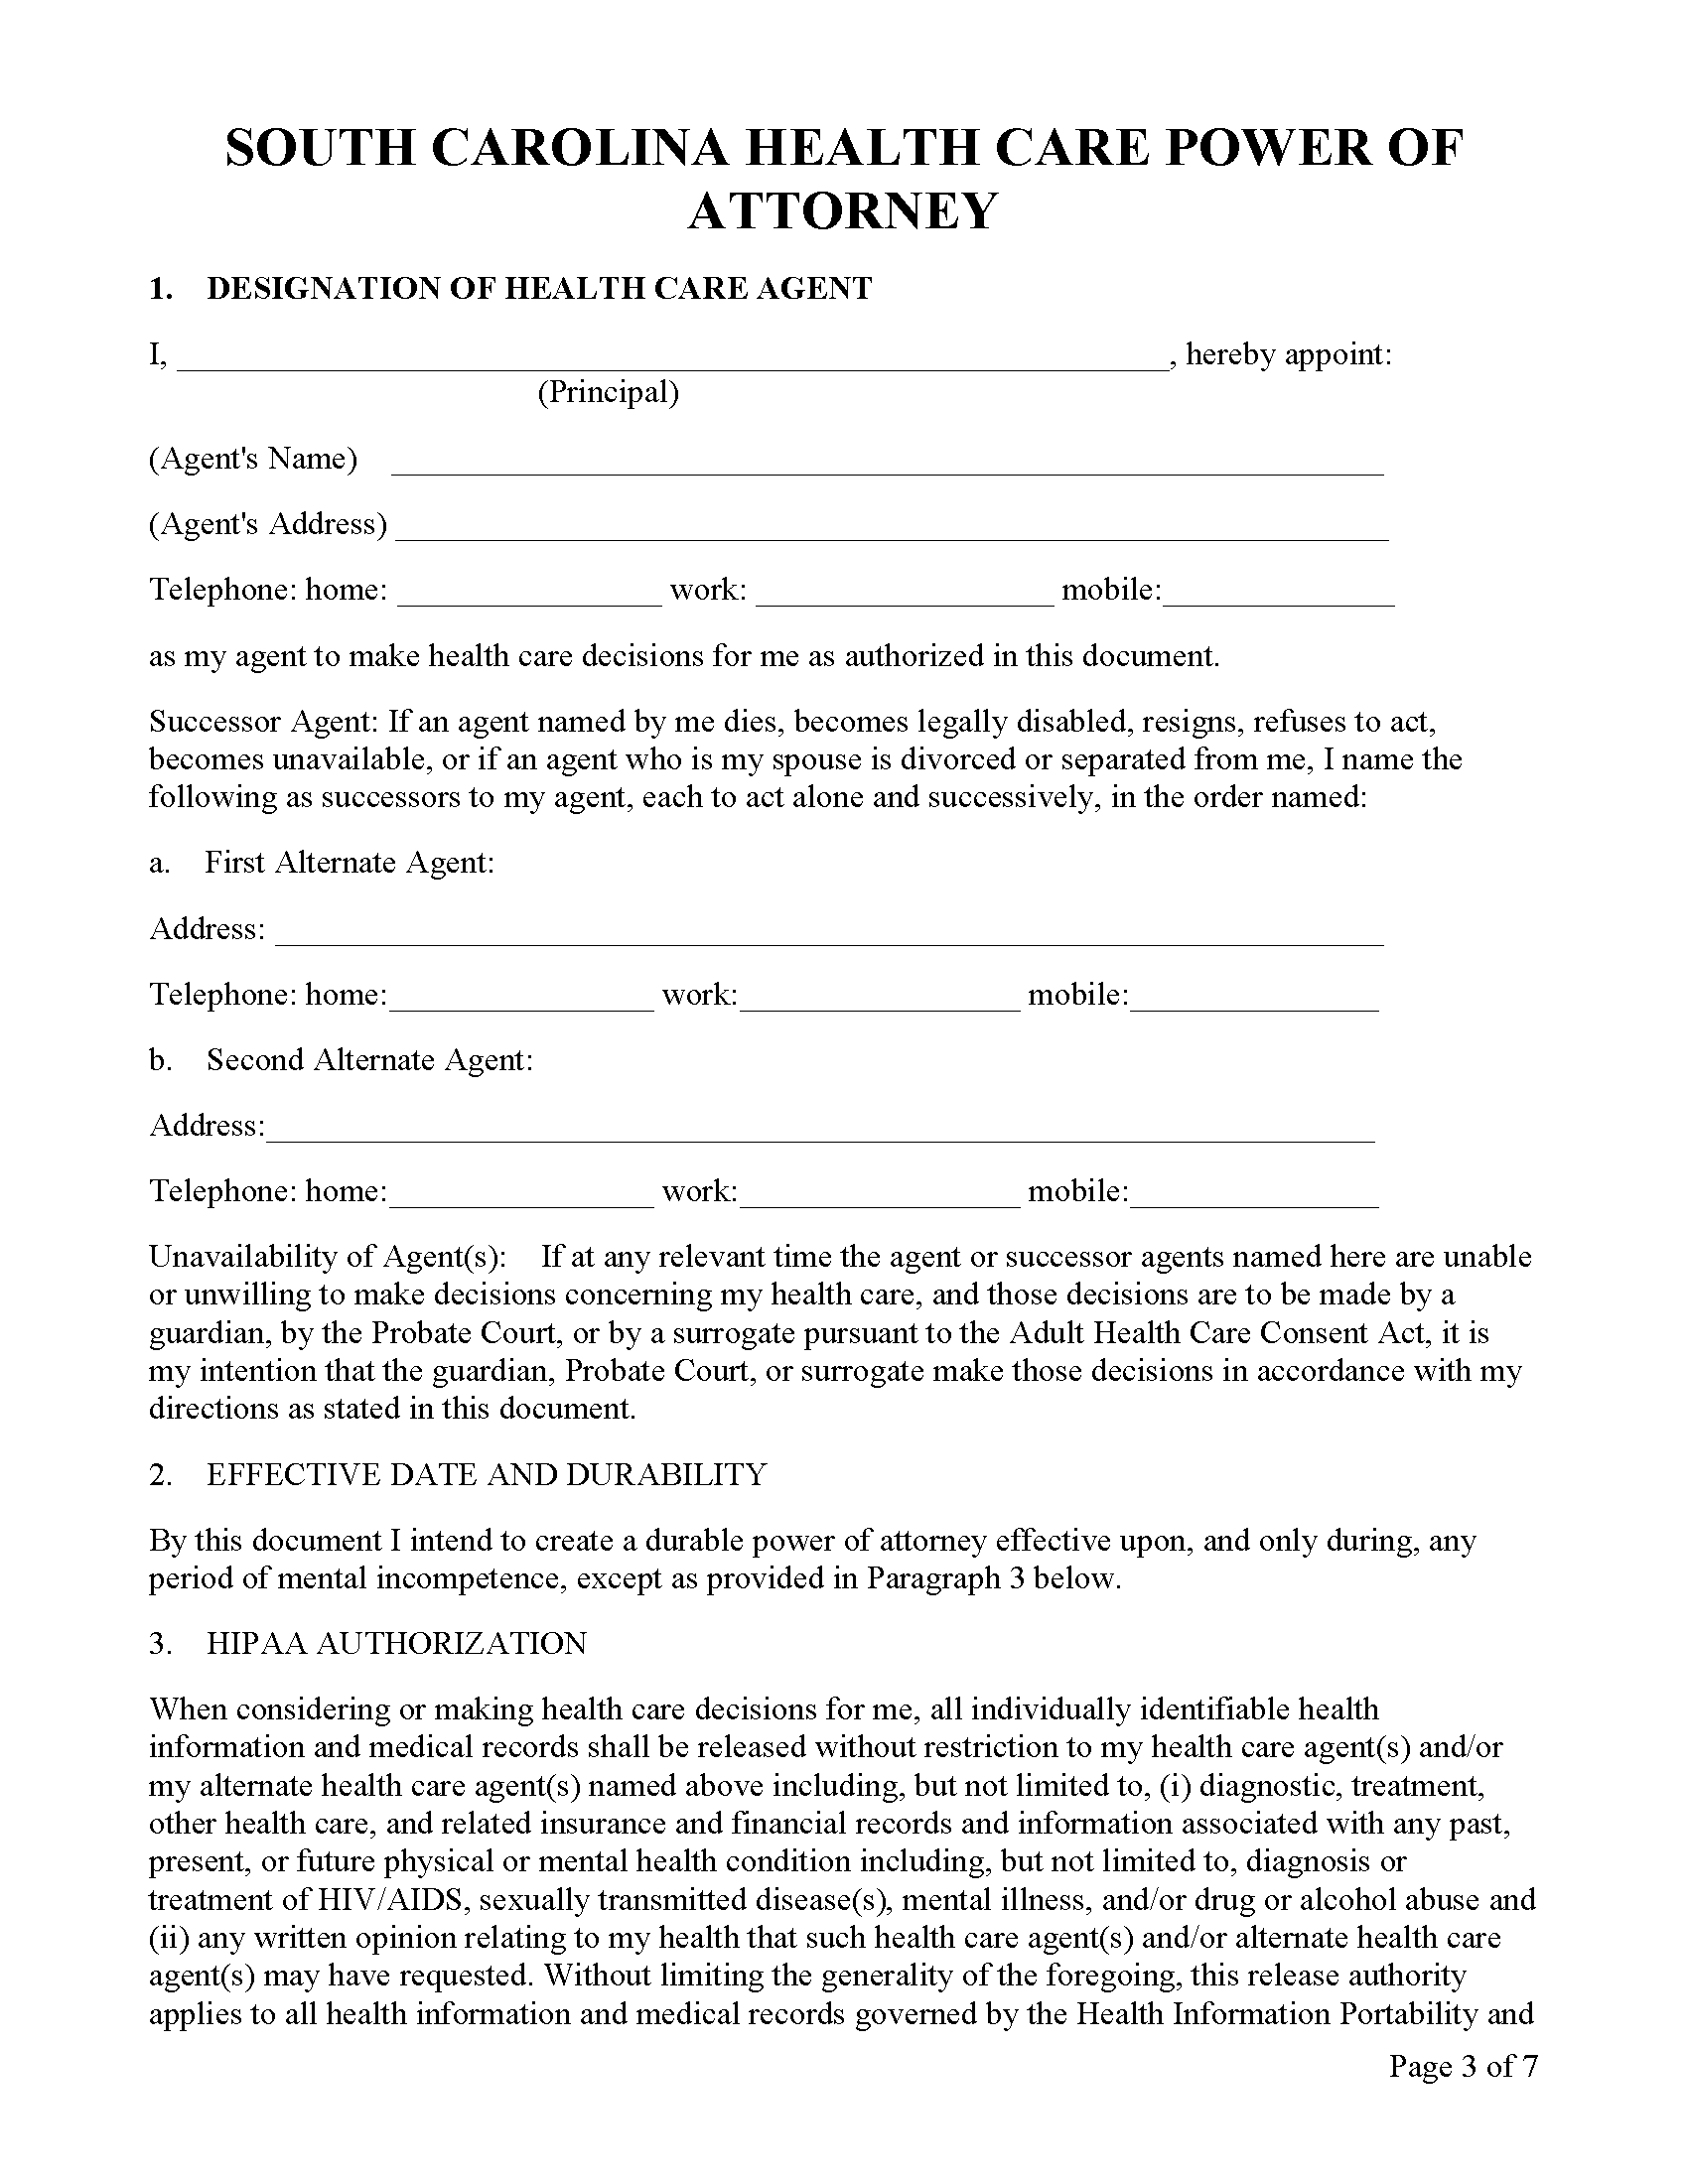 free-printable-power-of-attorney-form-for-sc-printable-forms-free-online